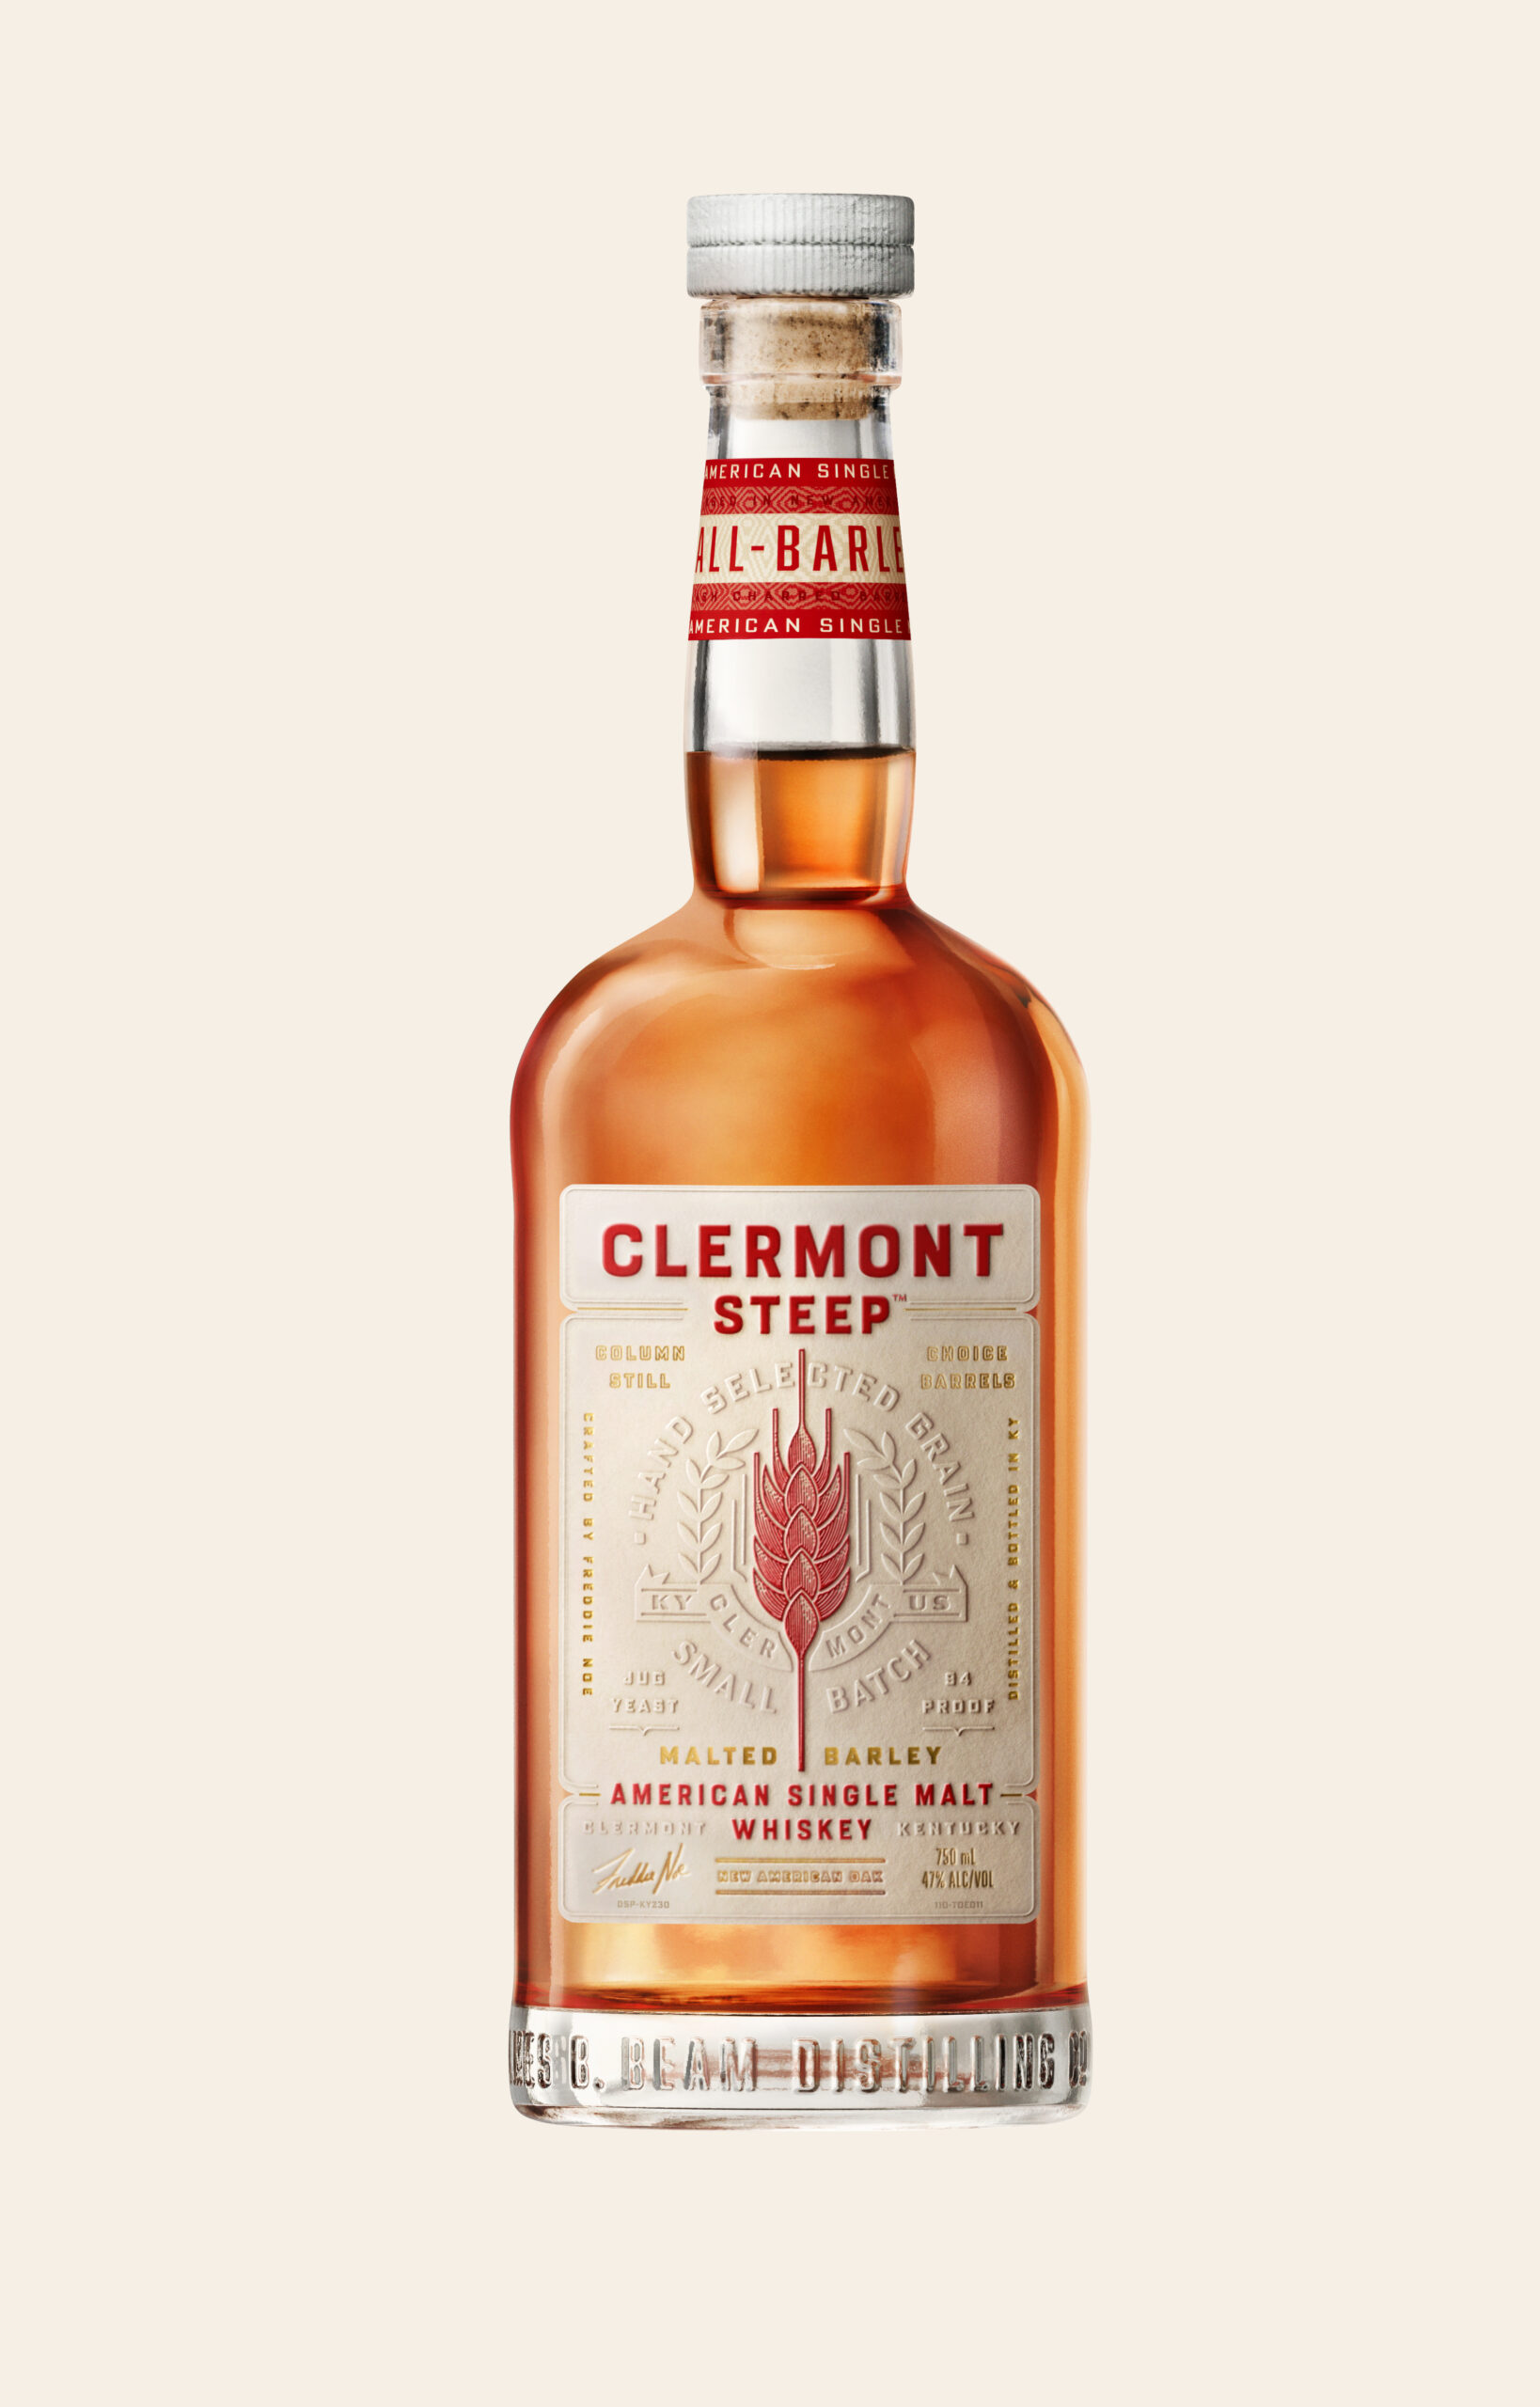 New: James B. Beam Distilling Co Releases Clermont Steep